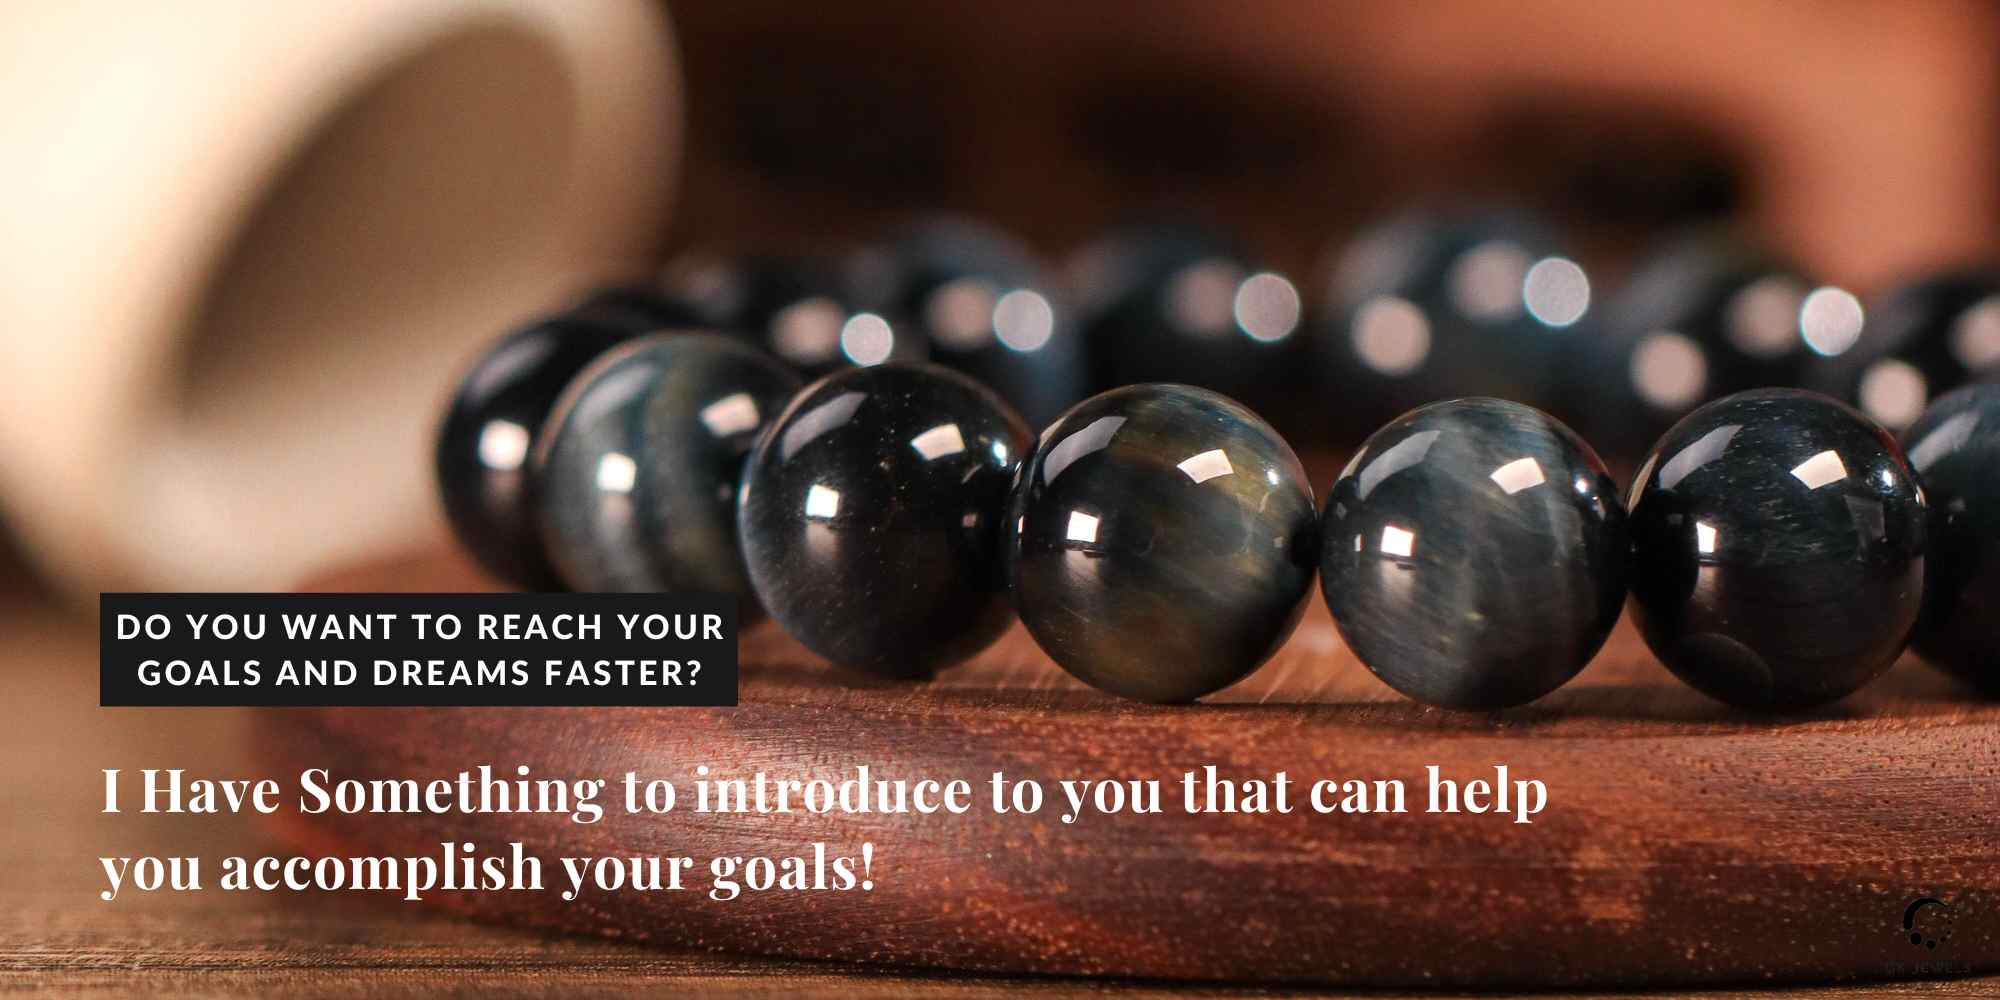 Do you want to reach your goals and dreams faster? I have something to introduce to you that can help you accomplish your goals!